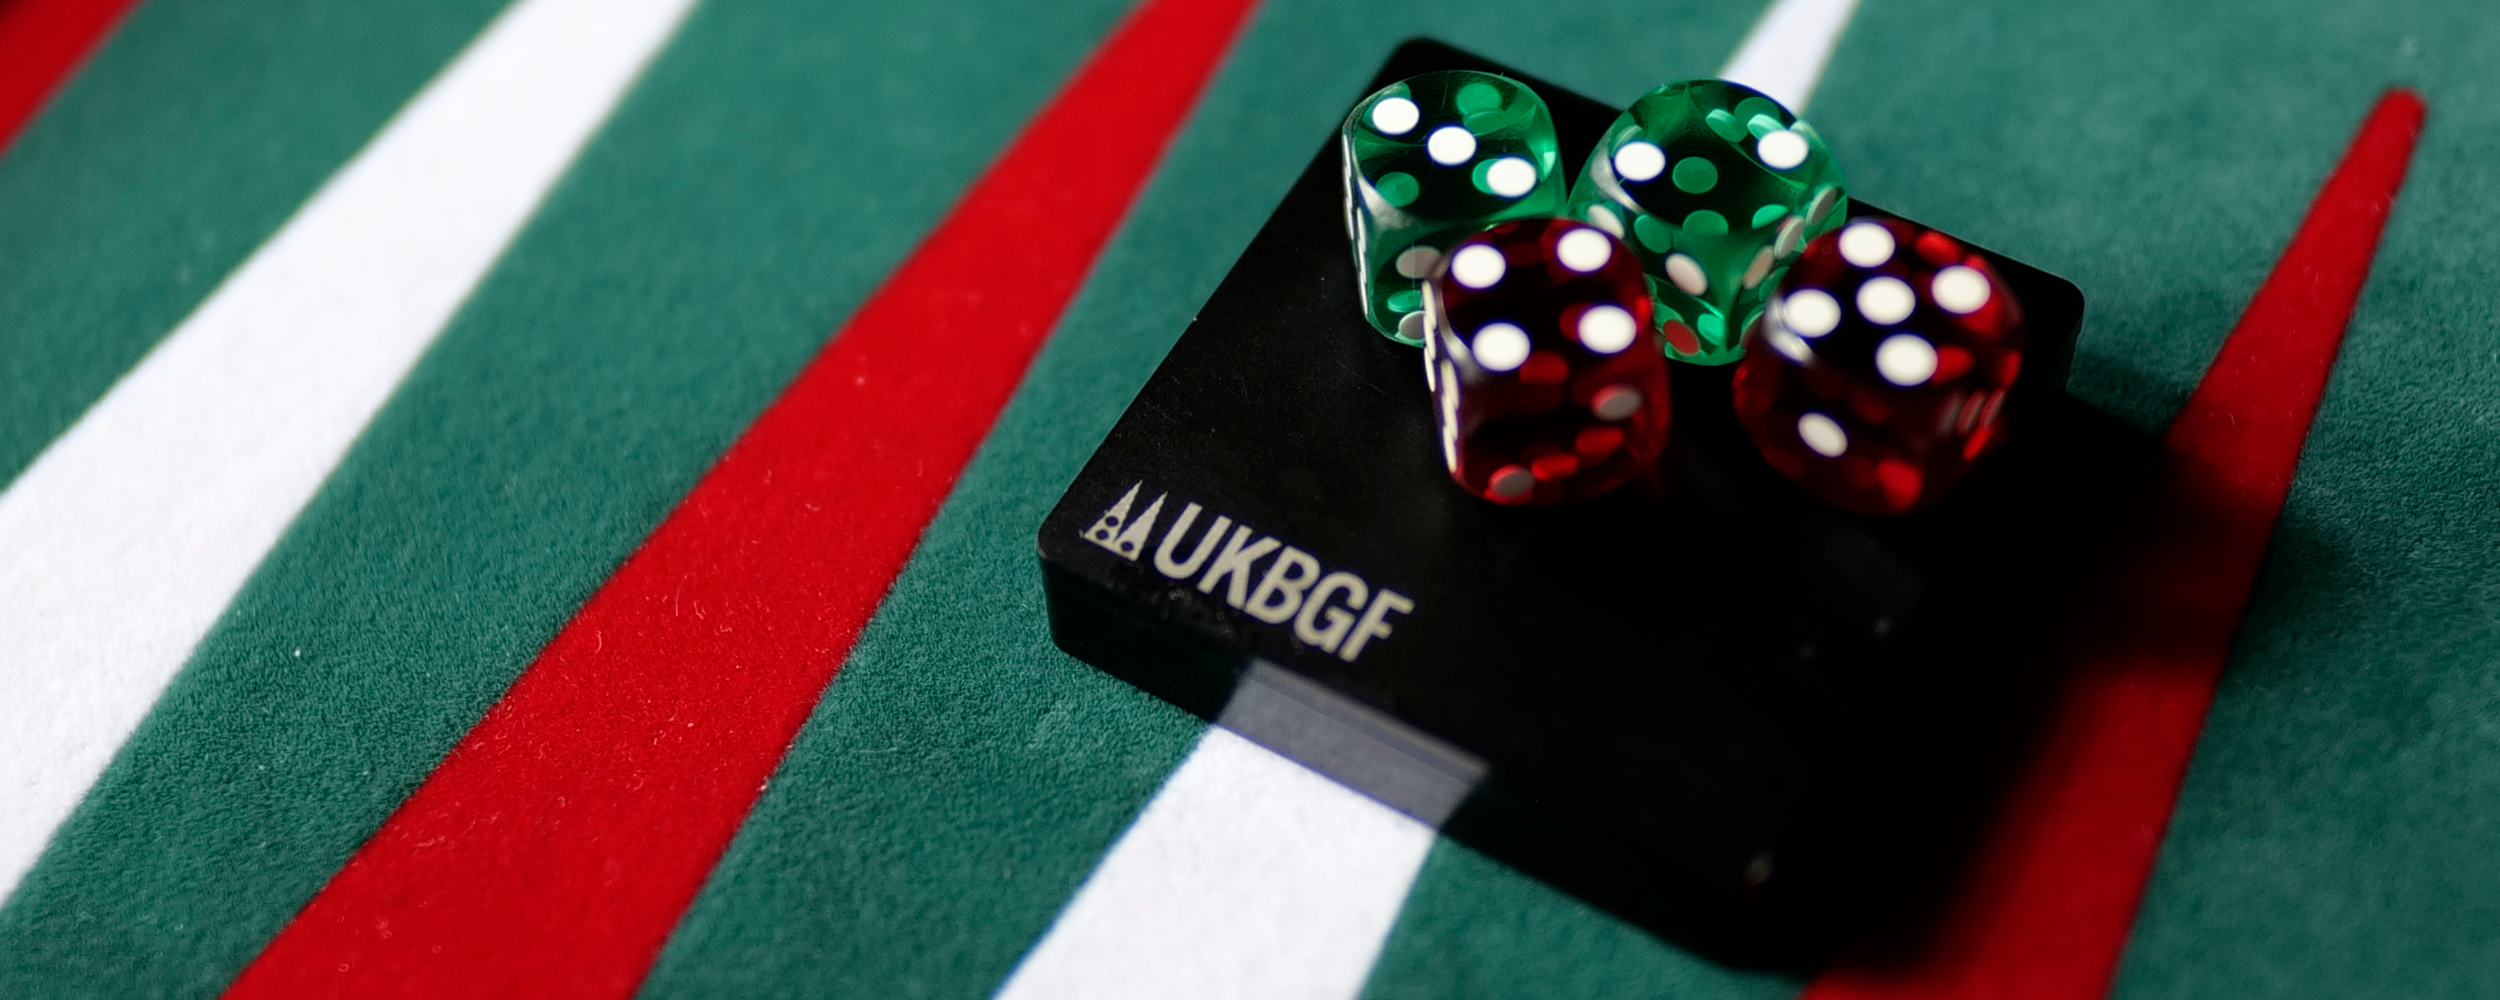 Close up of UKBGF branded precision red and green dice on green backgammon board.